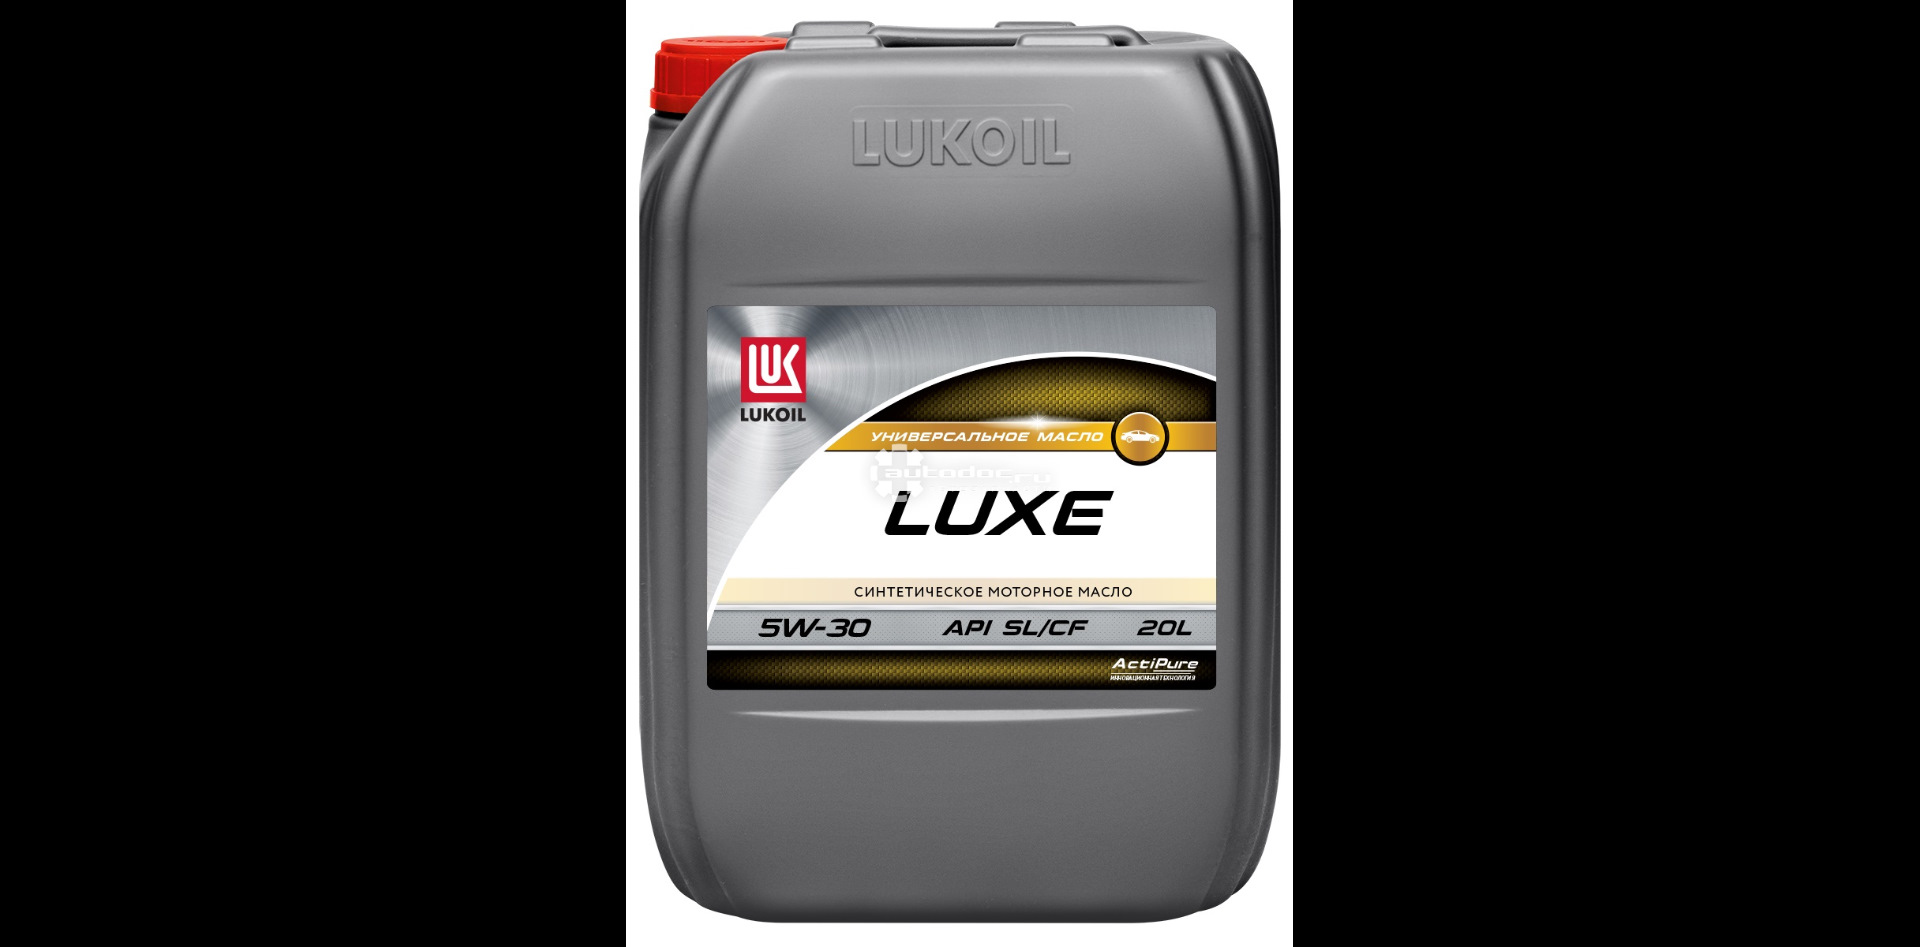 Масло 5w40 20л. Масло Luxe 5w30 синтетика. Lukoil Luxe 5w-40. Моторное масло Лукойл Люкс 5w30. 19456 Lukoil Лукойл Люкс 10w 40 20l масло моторное полусинт API SL/CF.